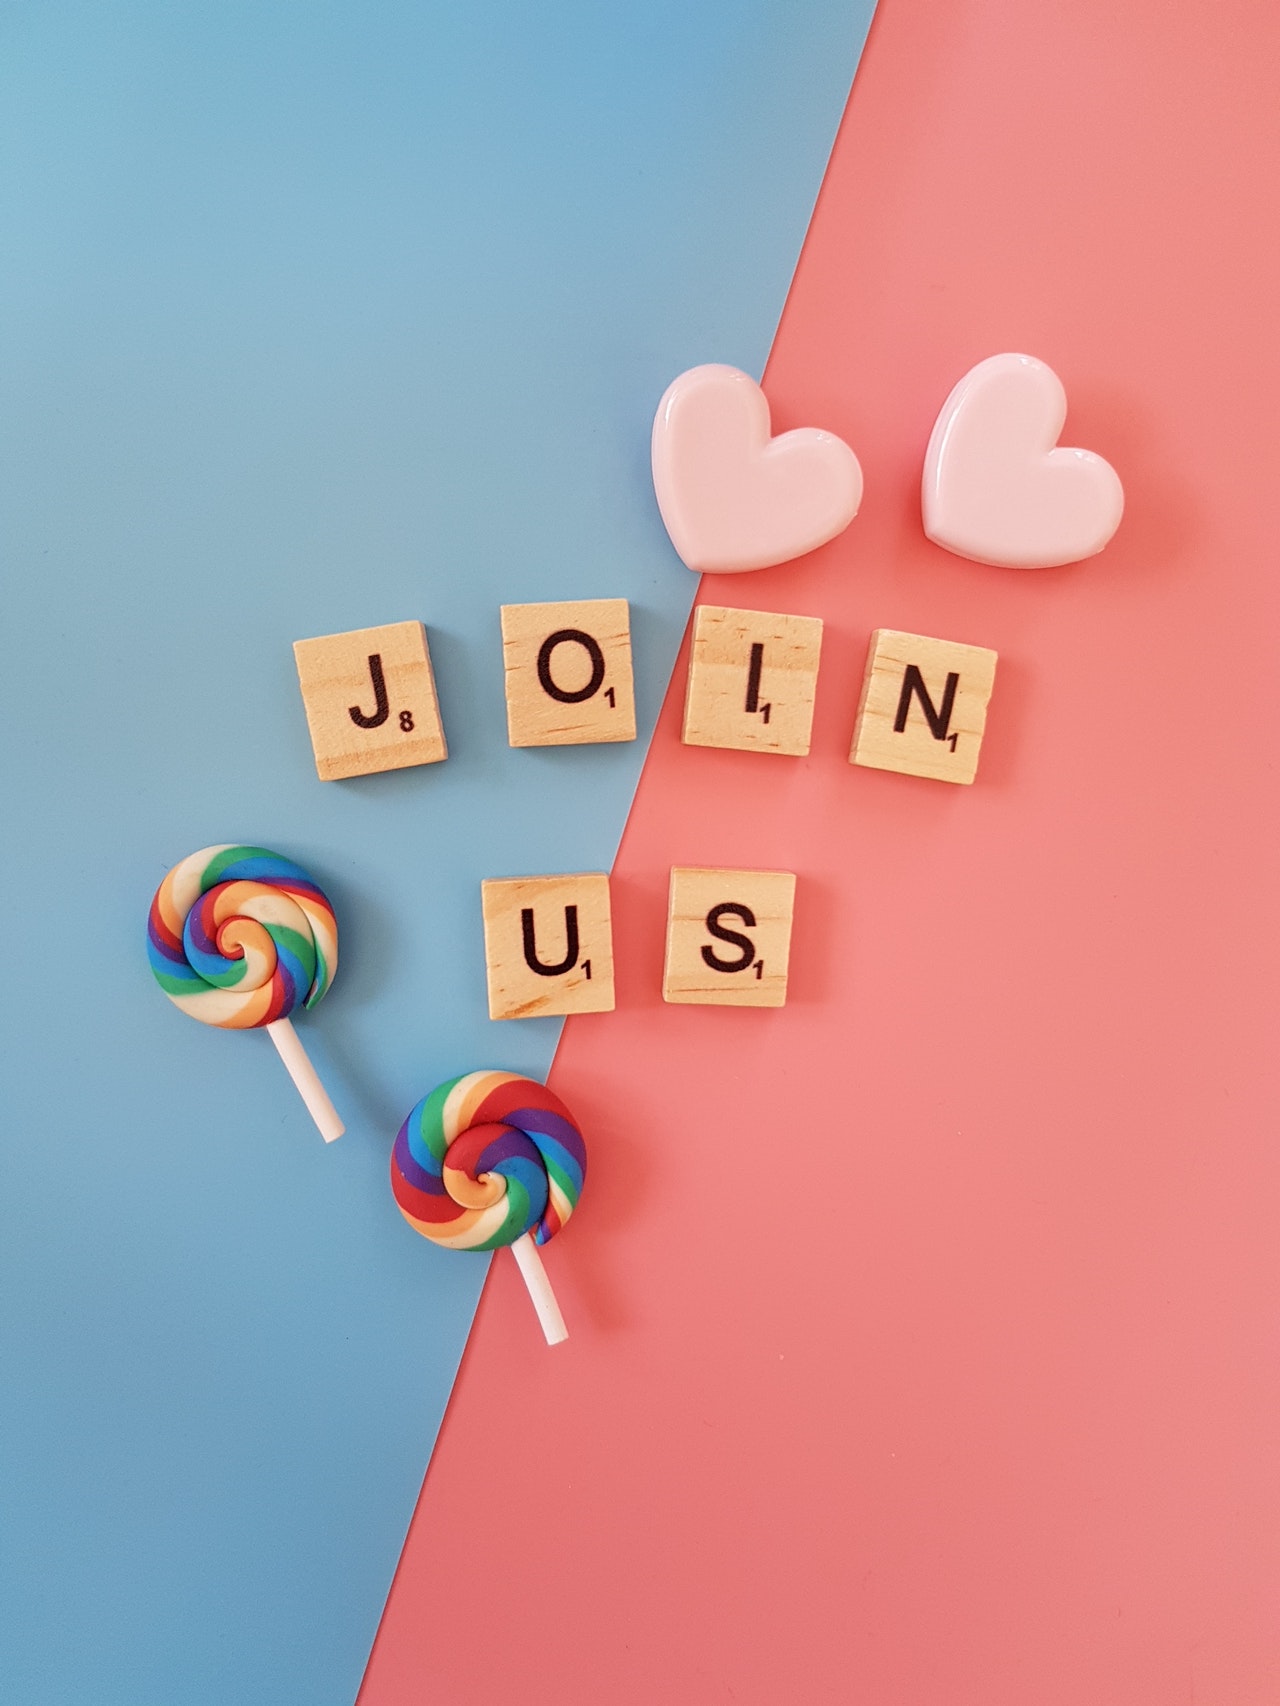 Letters of Join Us in the centre, with two love hearts on the top right corner and two lollipop on the bottom left, on a blue and pink background.